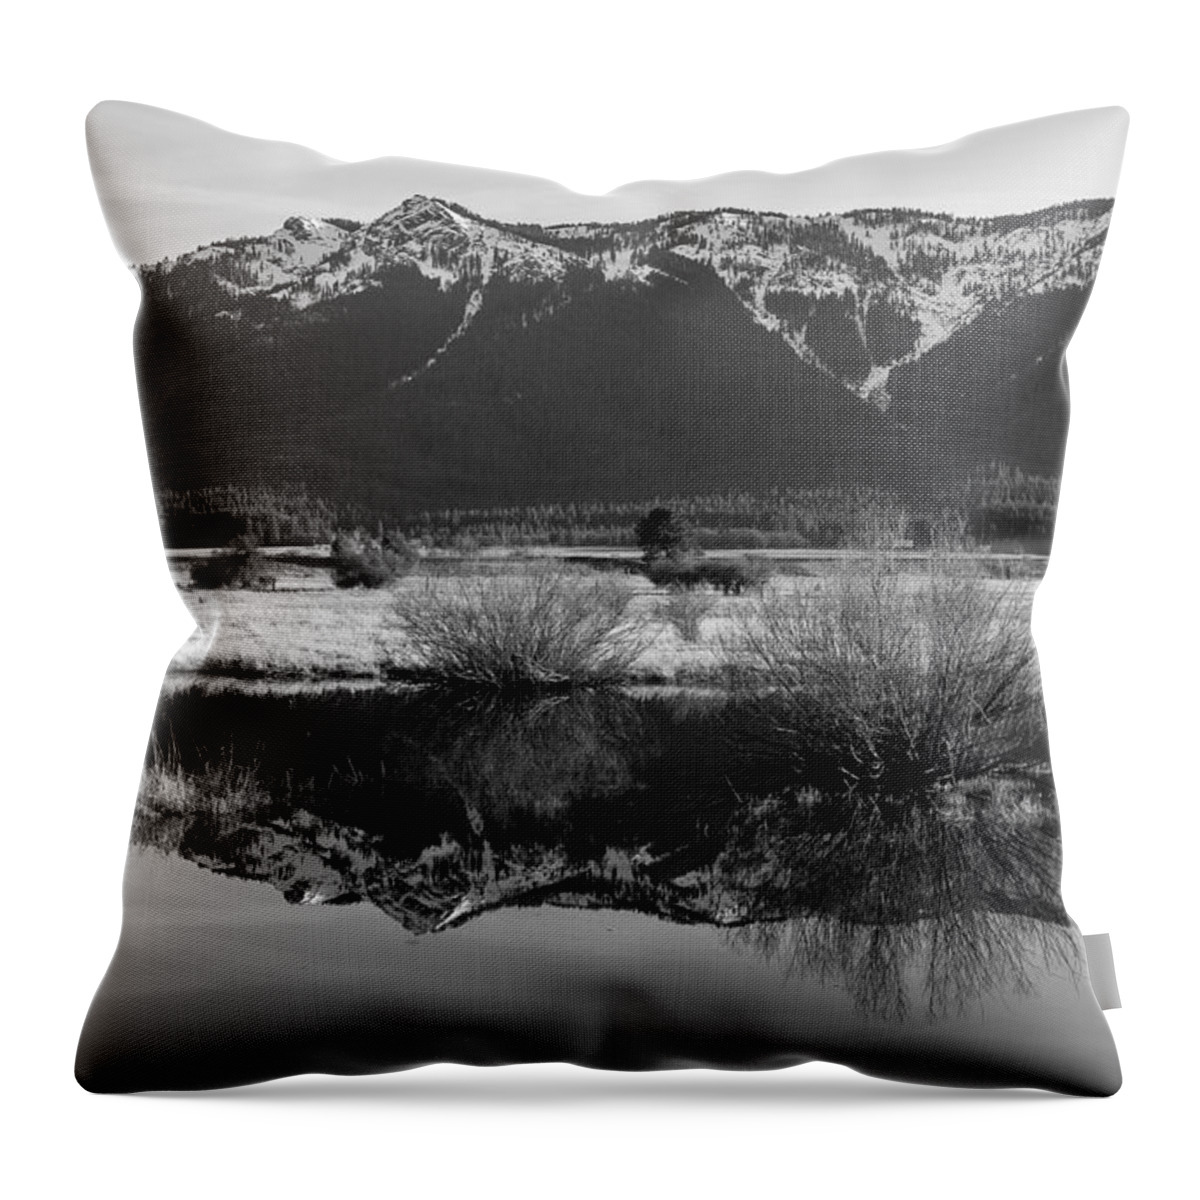 2016 Throw Pillow featuring the photograph Mt. Hough Reflection by Jan Davies